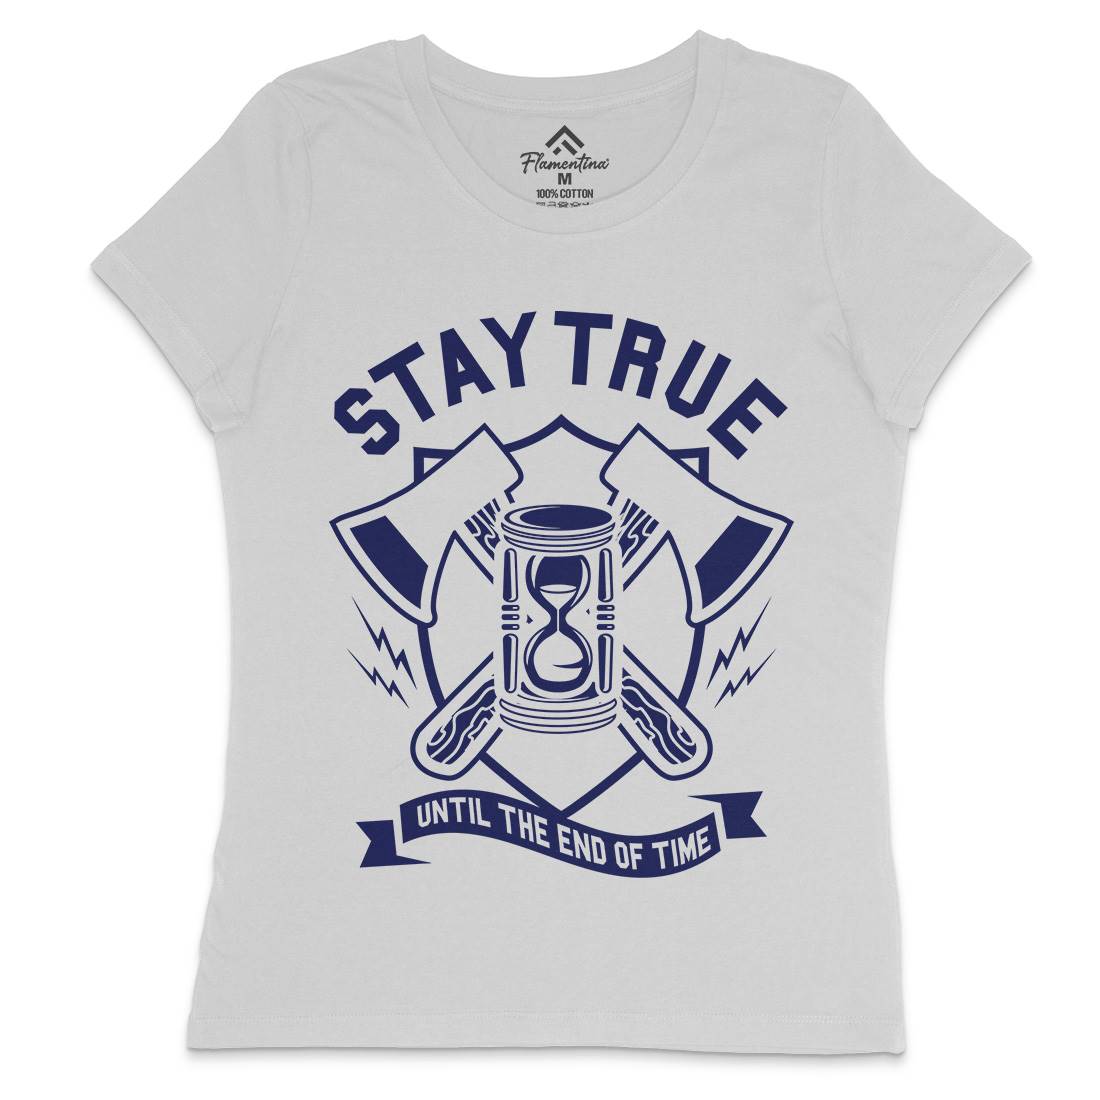 Stay True Womens Crew Neck T-Shirt Quotes A285